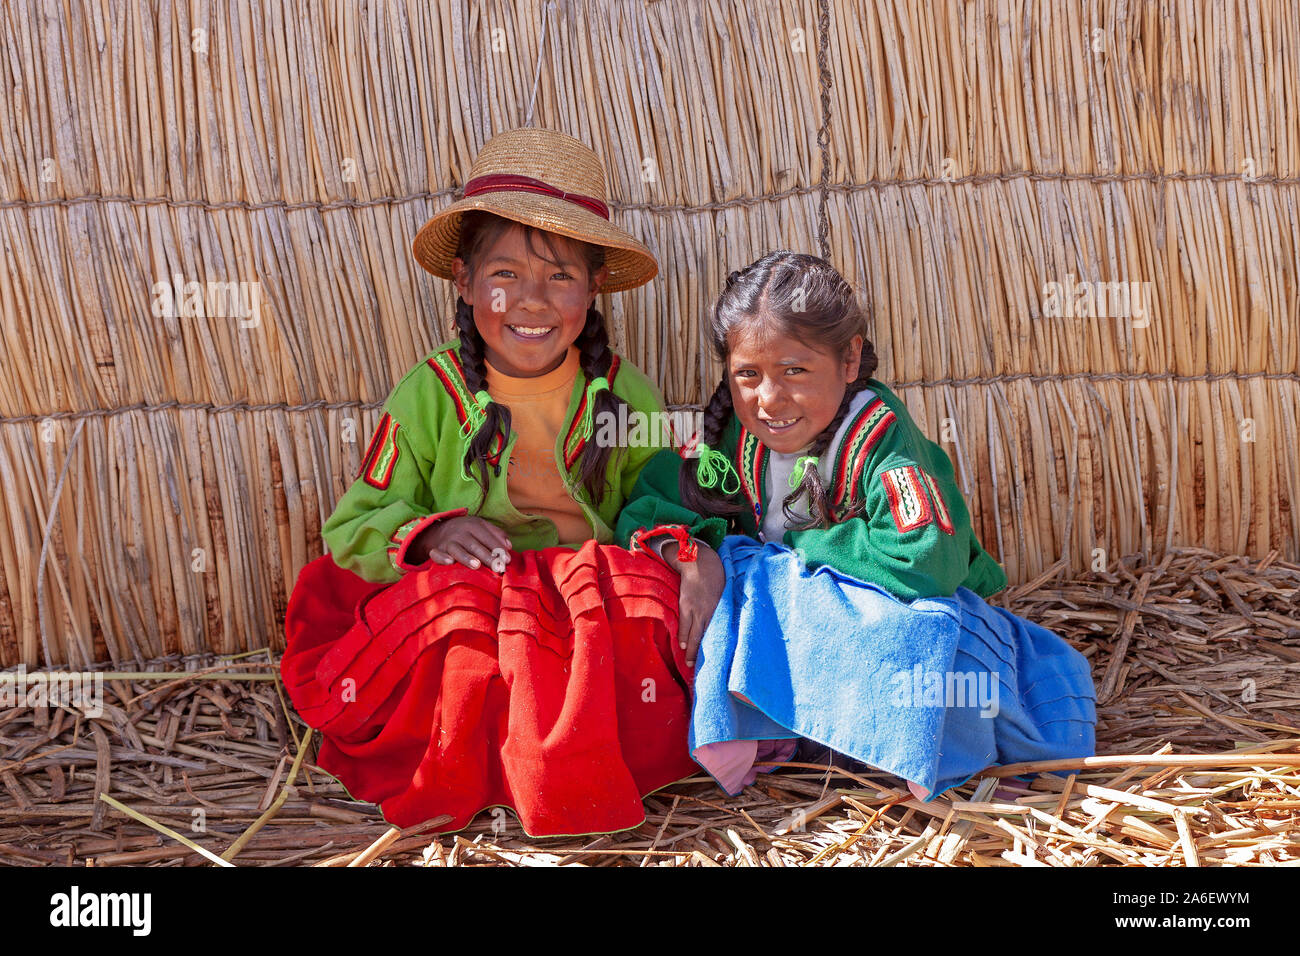 A portrait of two young girls sitting in front of a straw hut on a floating Uro Island in Lake Titicaca, Puno, Peru. Stock Photo